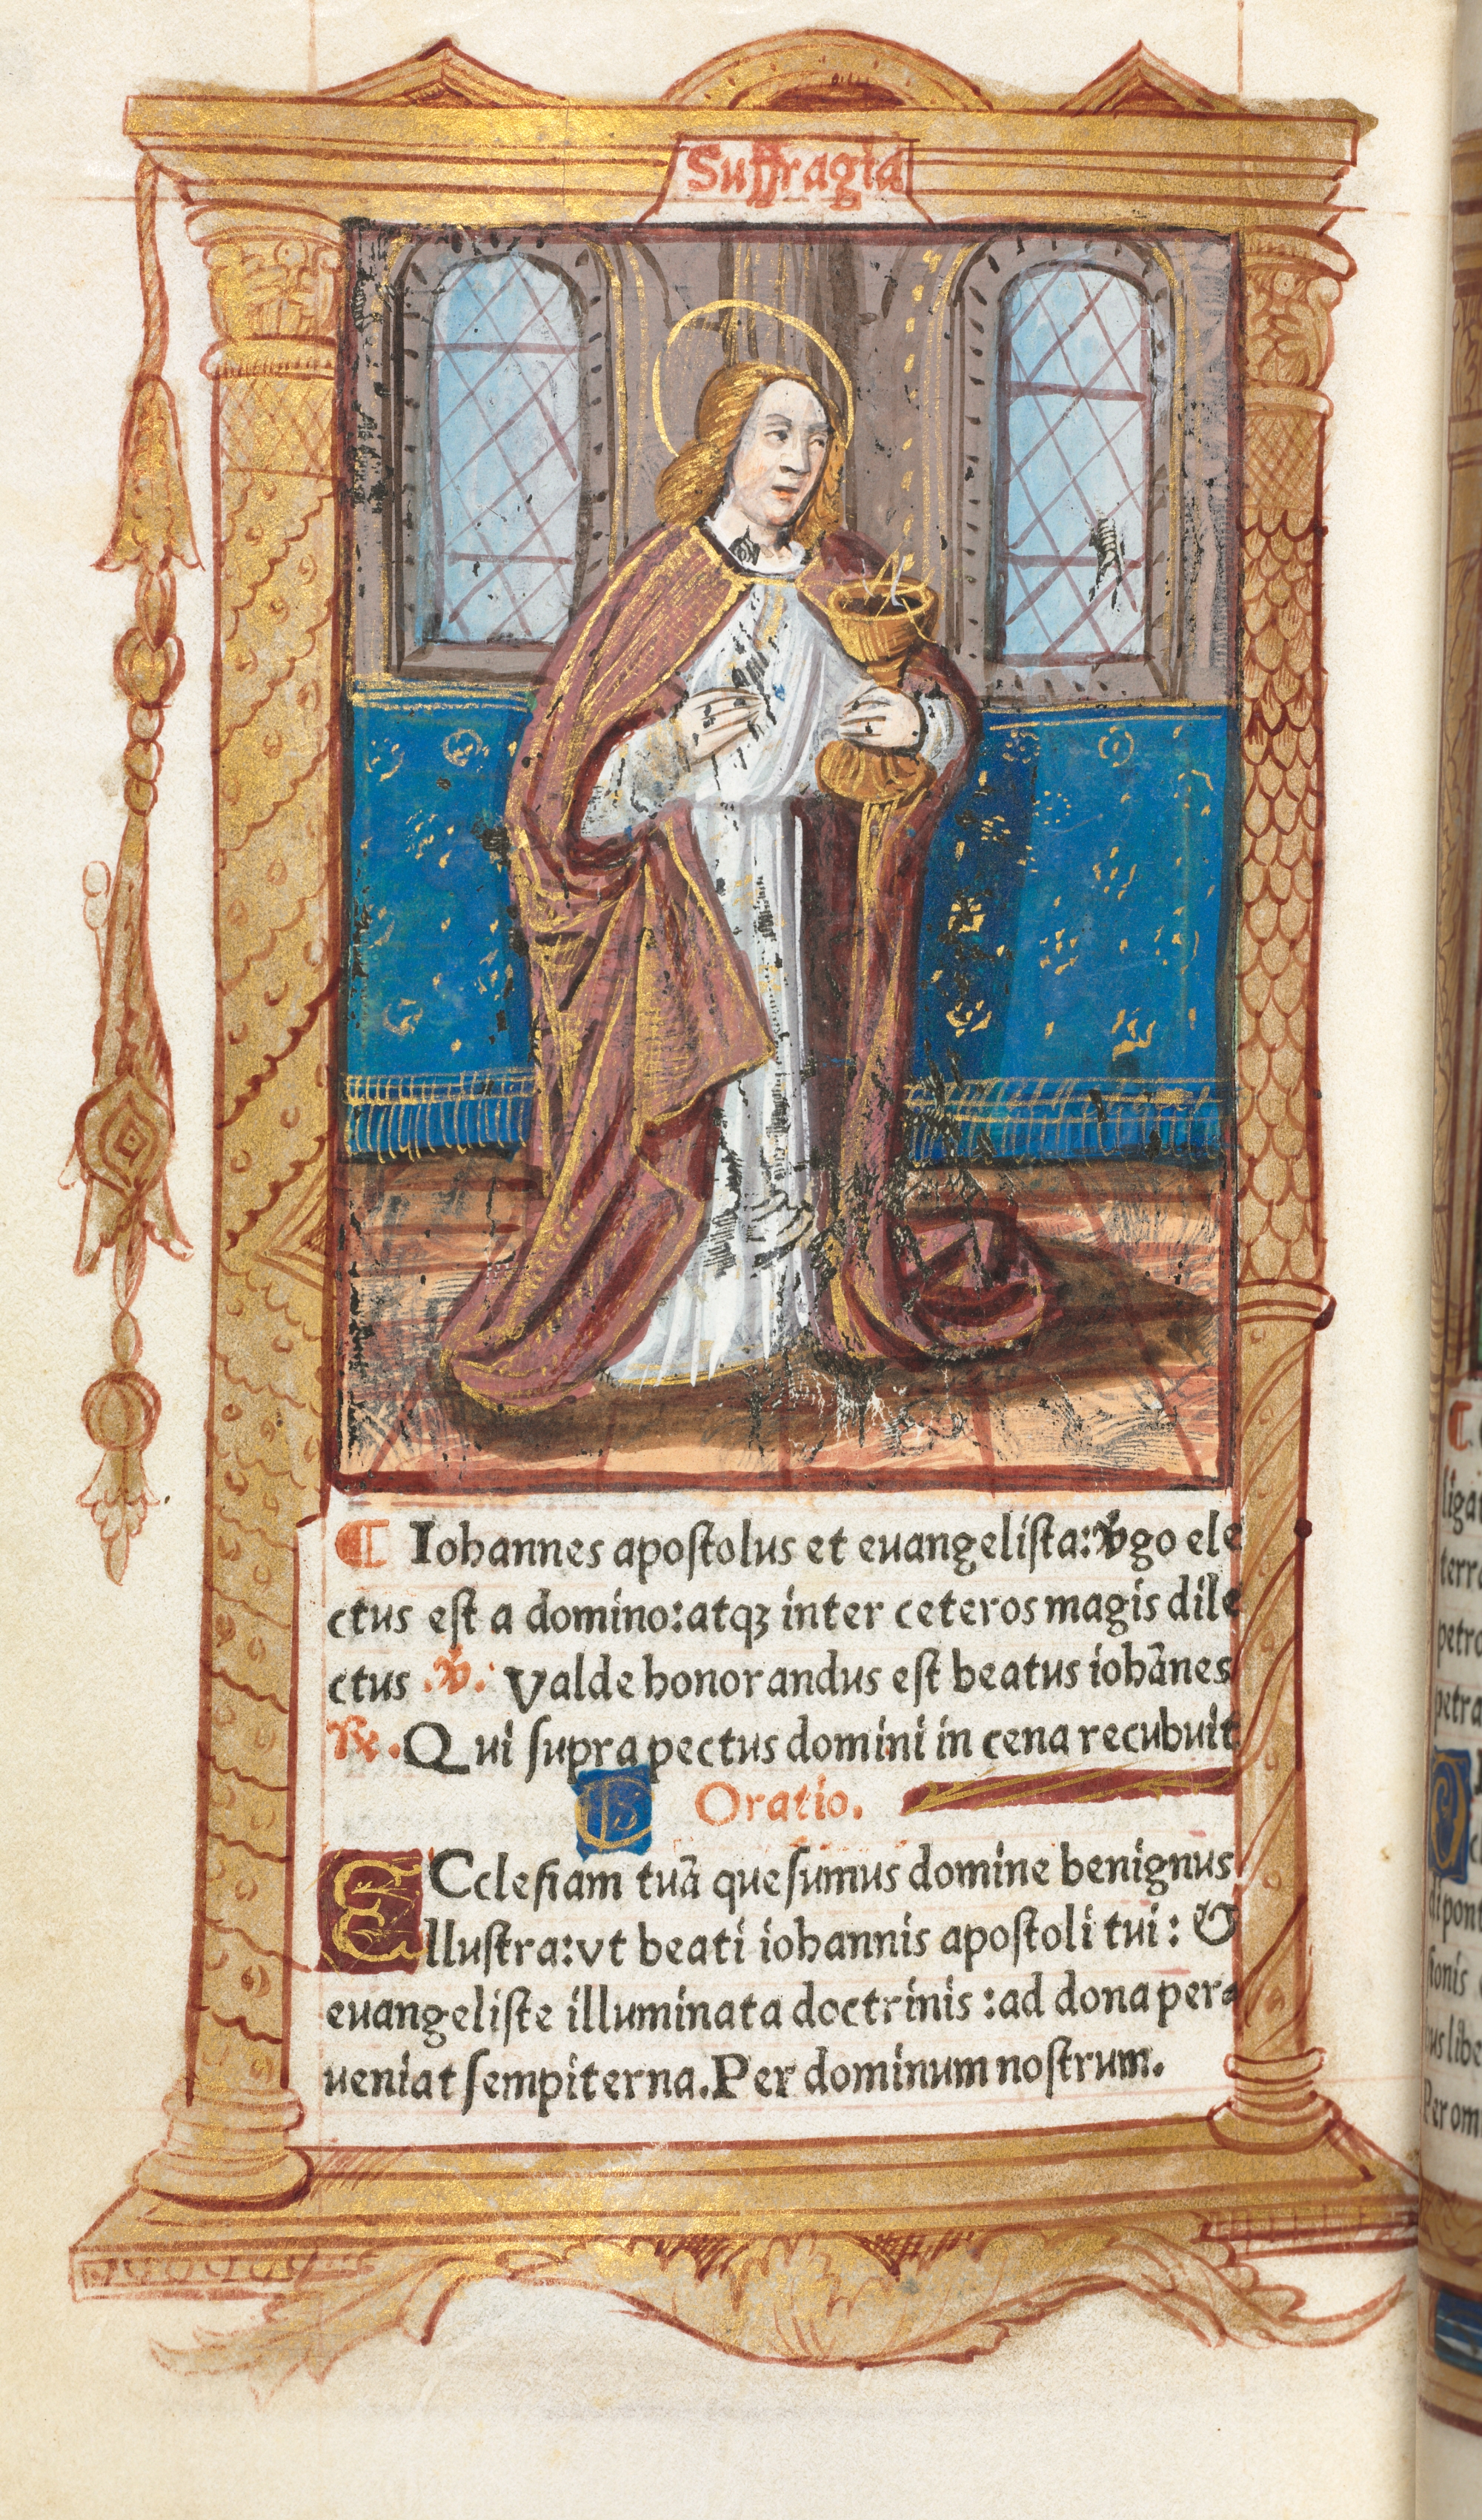 Printed Book of Hours (Use of Rome):  fol. 98v, St. John the Evangelist